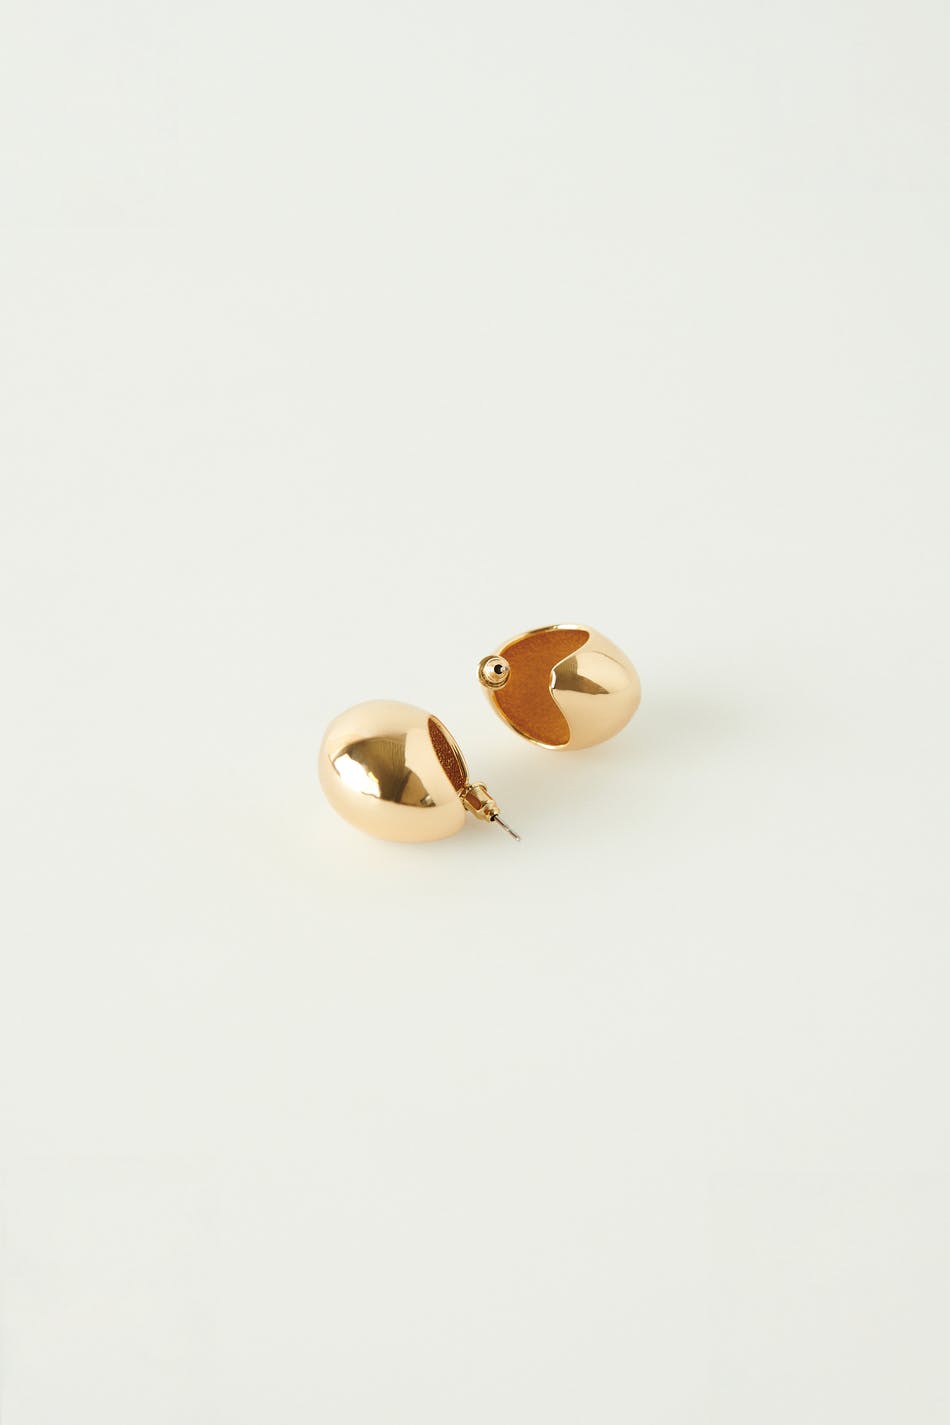 Superchunky gold hoops, Gina Tricot